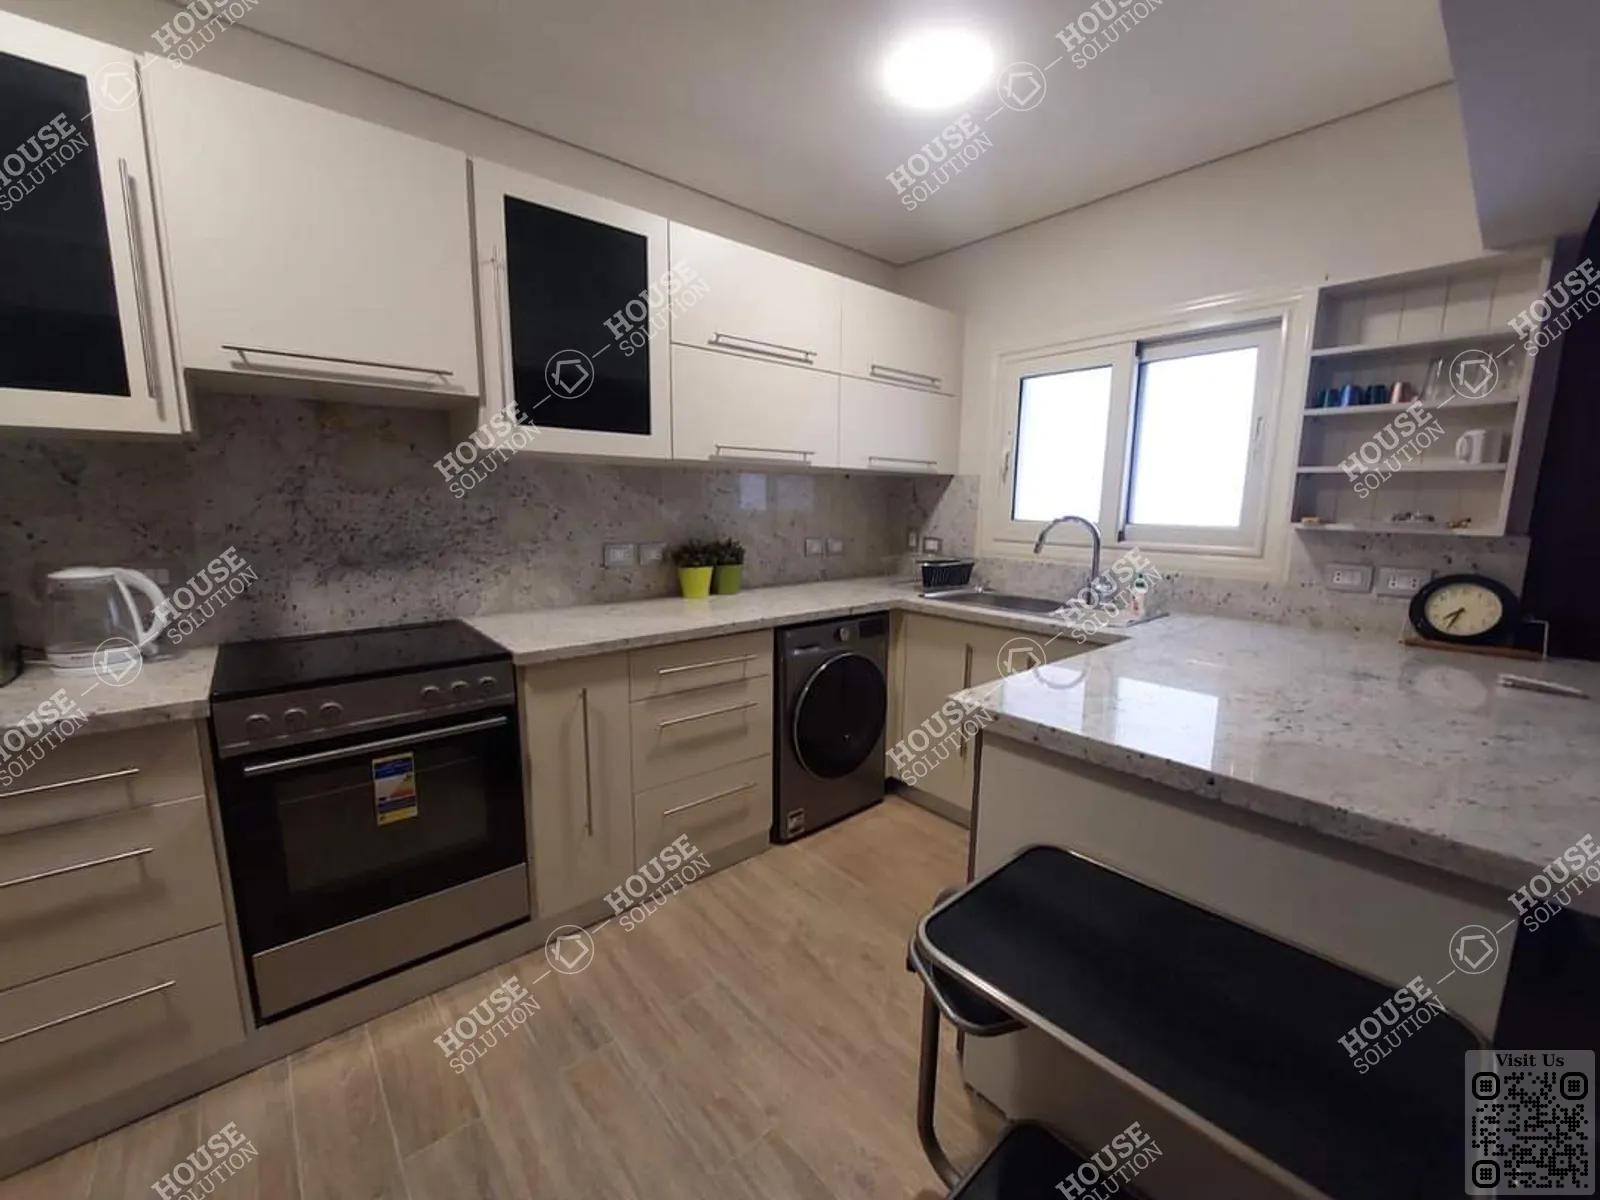 KITCHEN  @ Apartments For Rent In Maadi Maadi Degla Area: 145 m² consists of 2 Bedrooms 2 Bathrooms Furnished 5 stars #5910-1